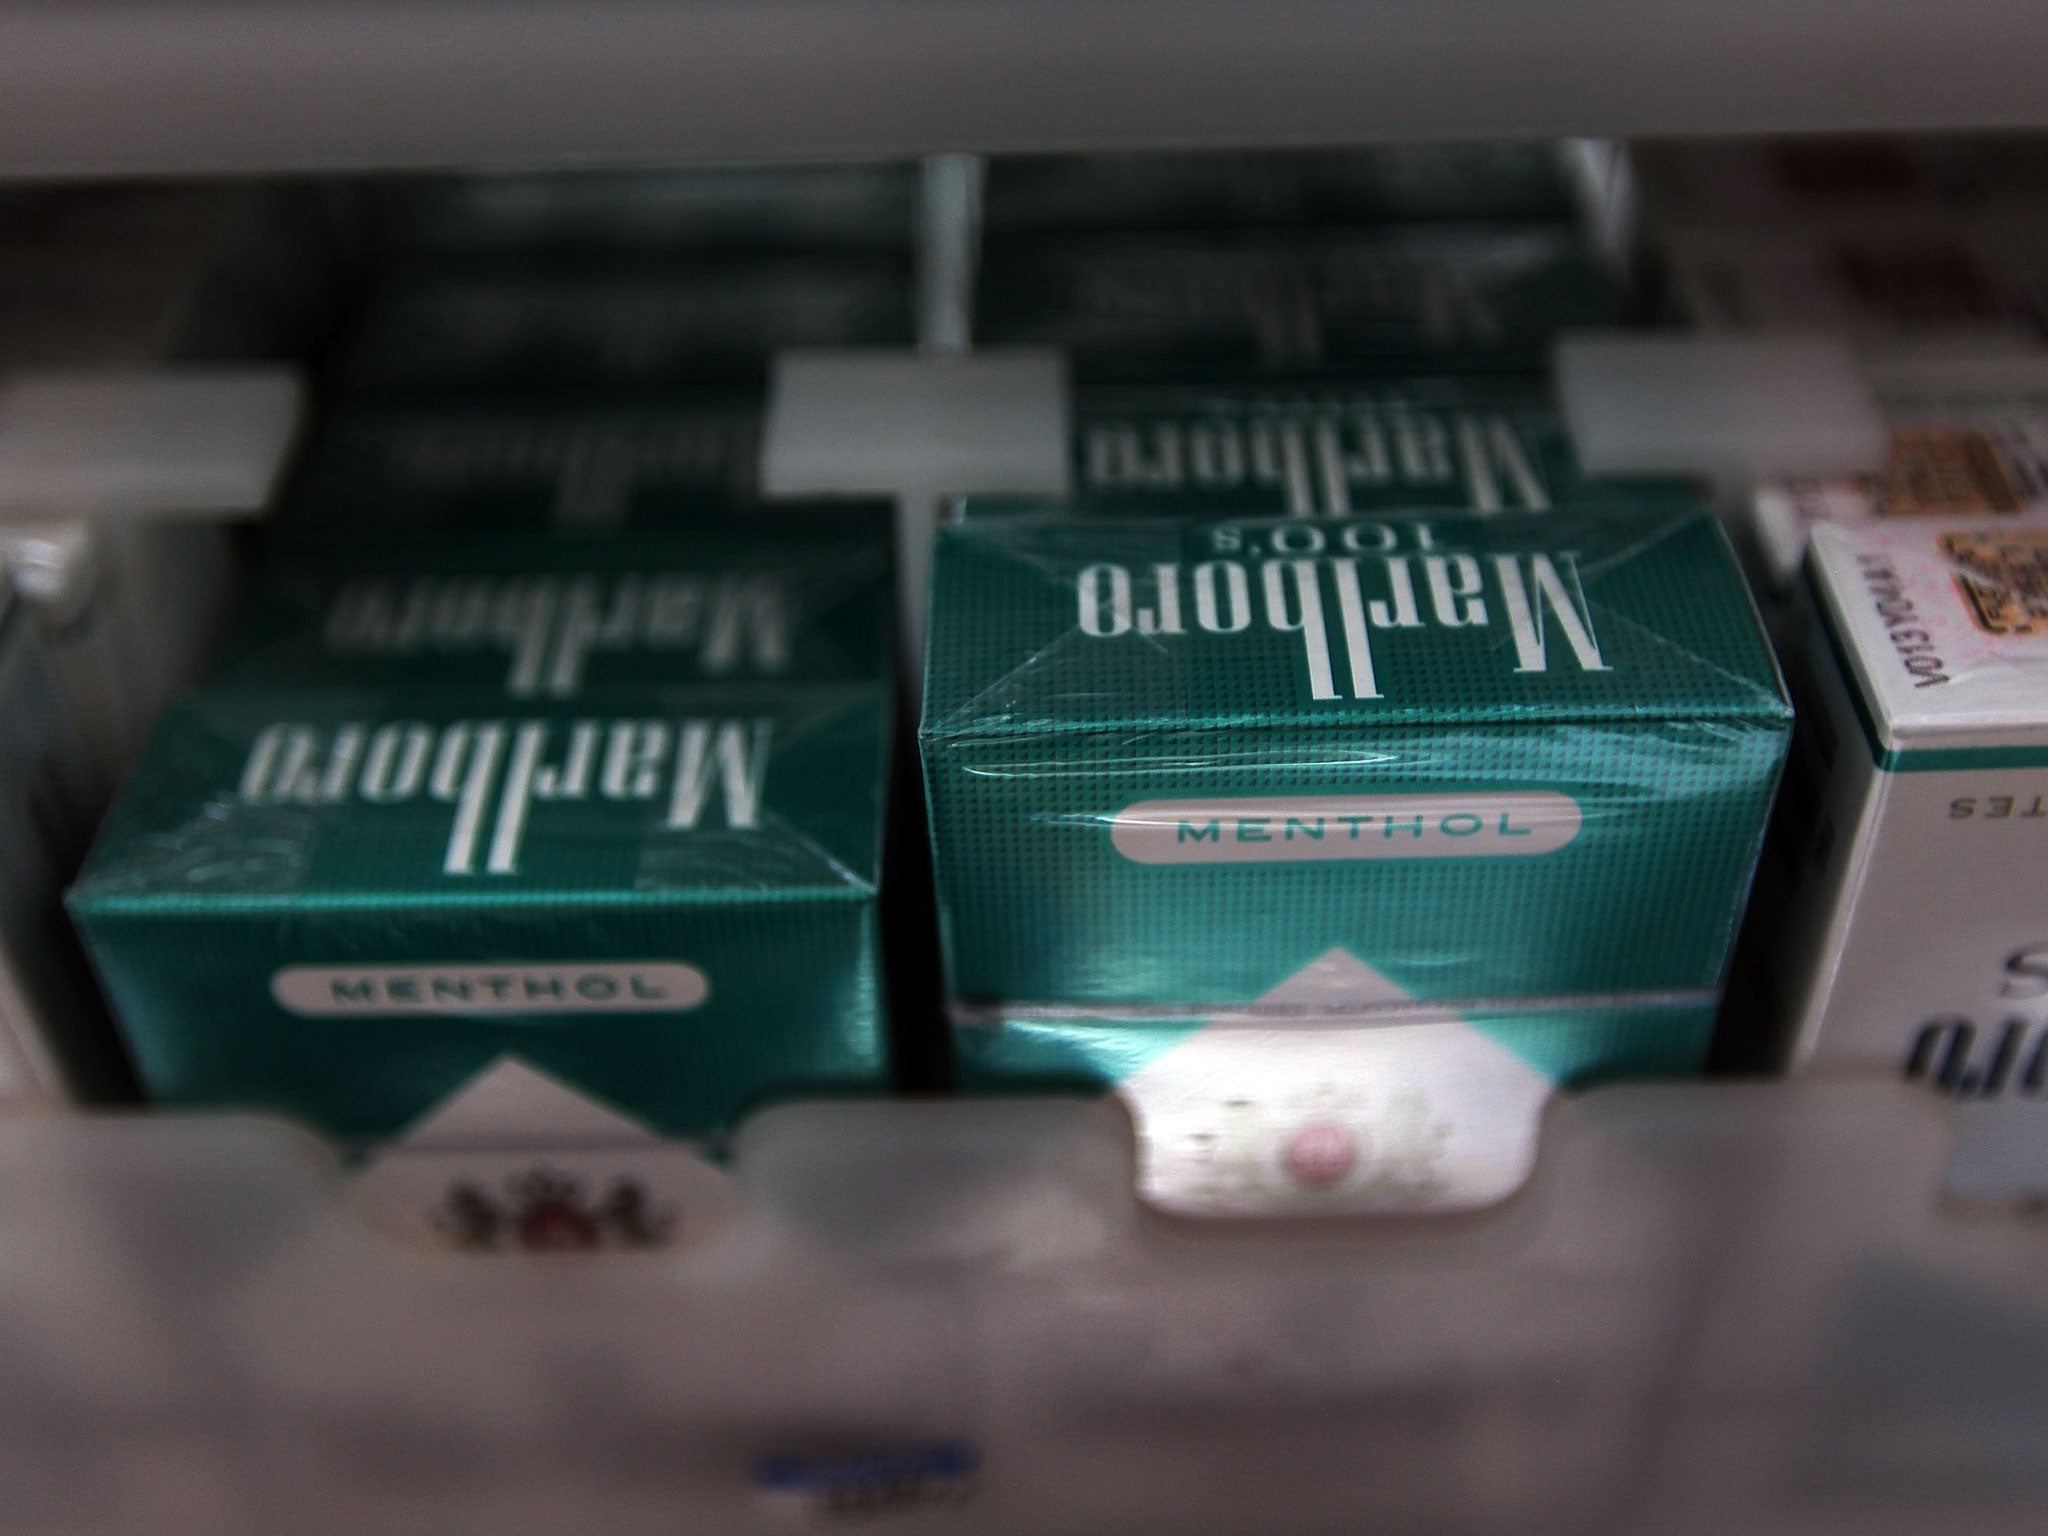 The government started phasing out the cigarettes last May when packaging was standardised